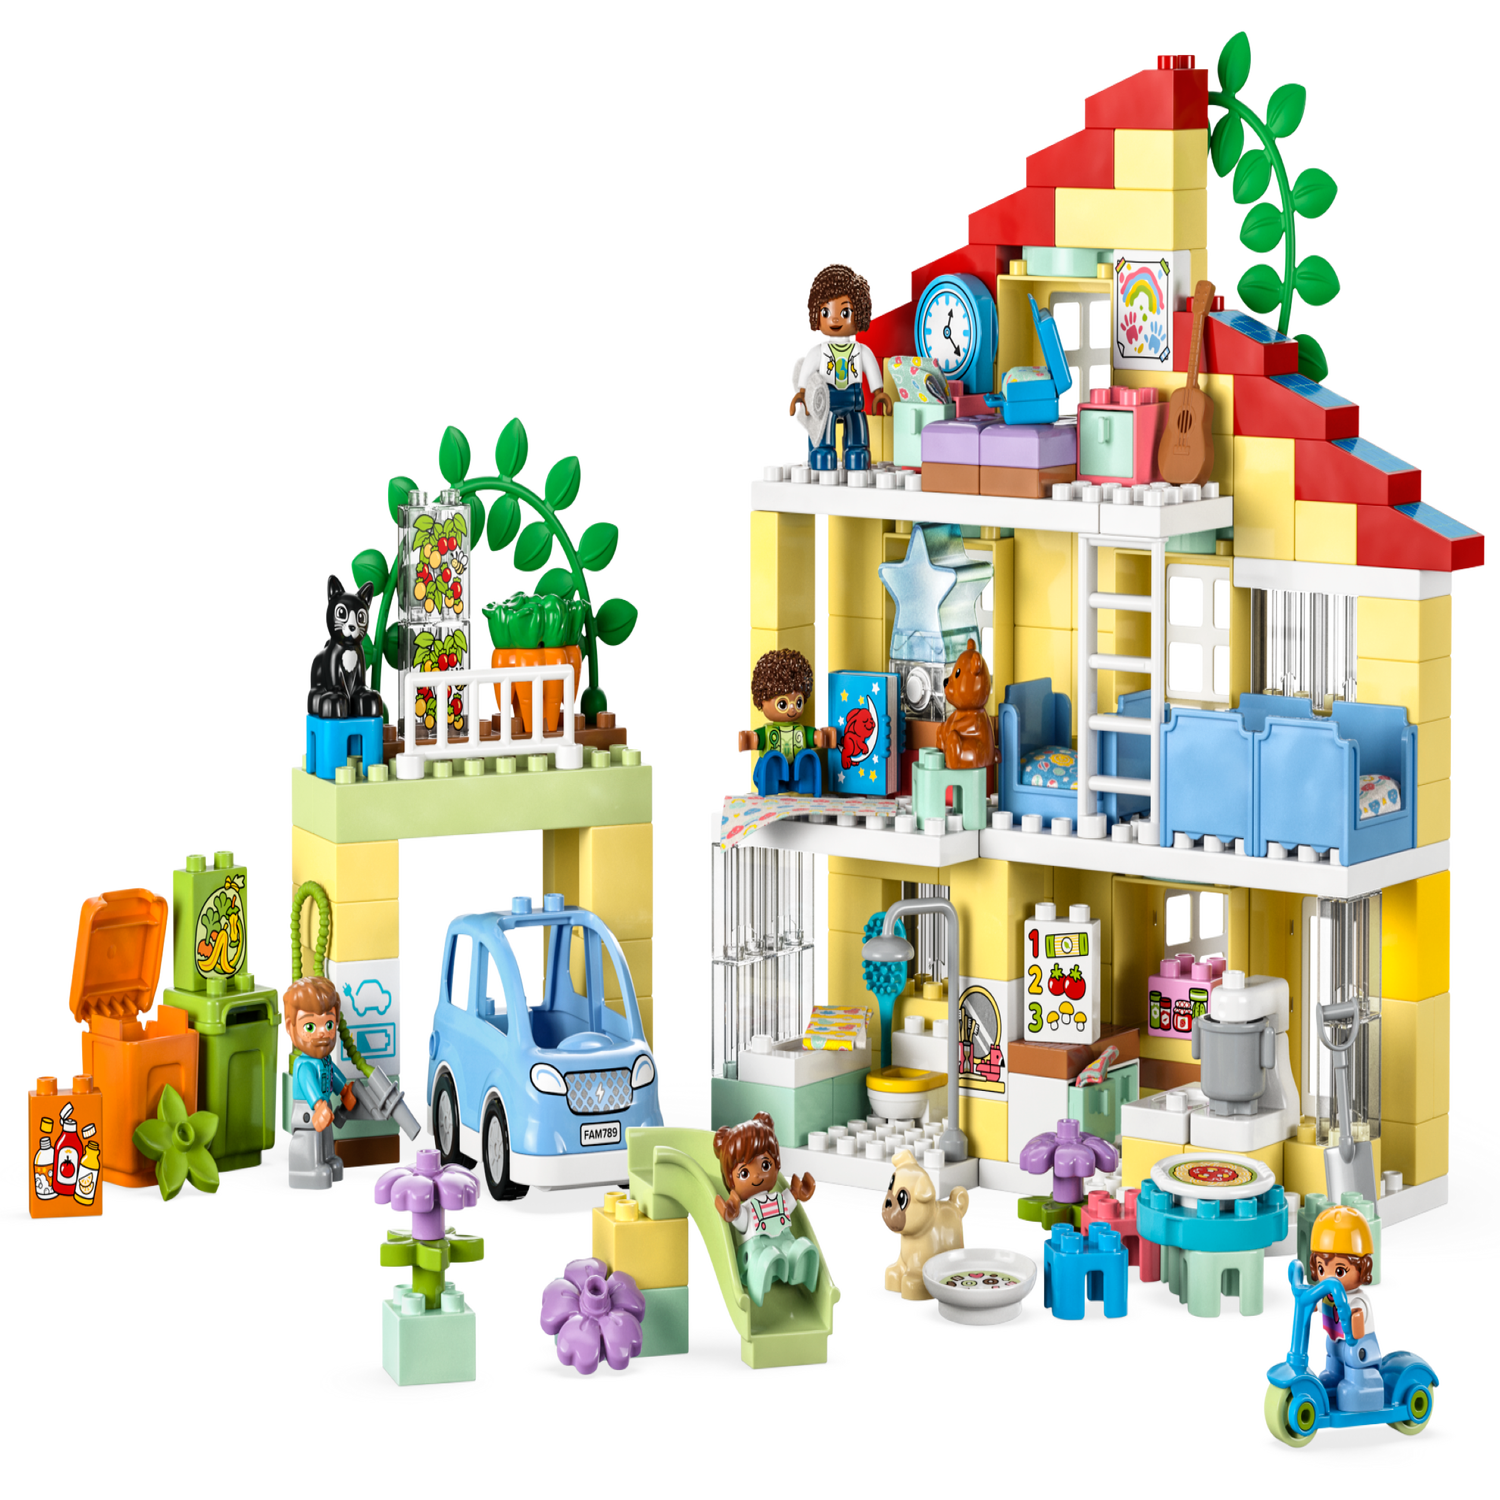 3in1 Family House 10994 | DUPLO® | Buy online at the Official LEGO® Shop US